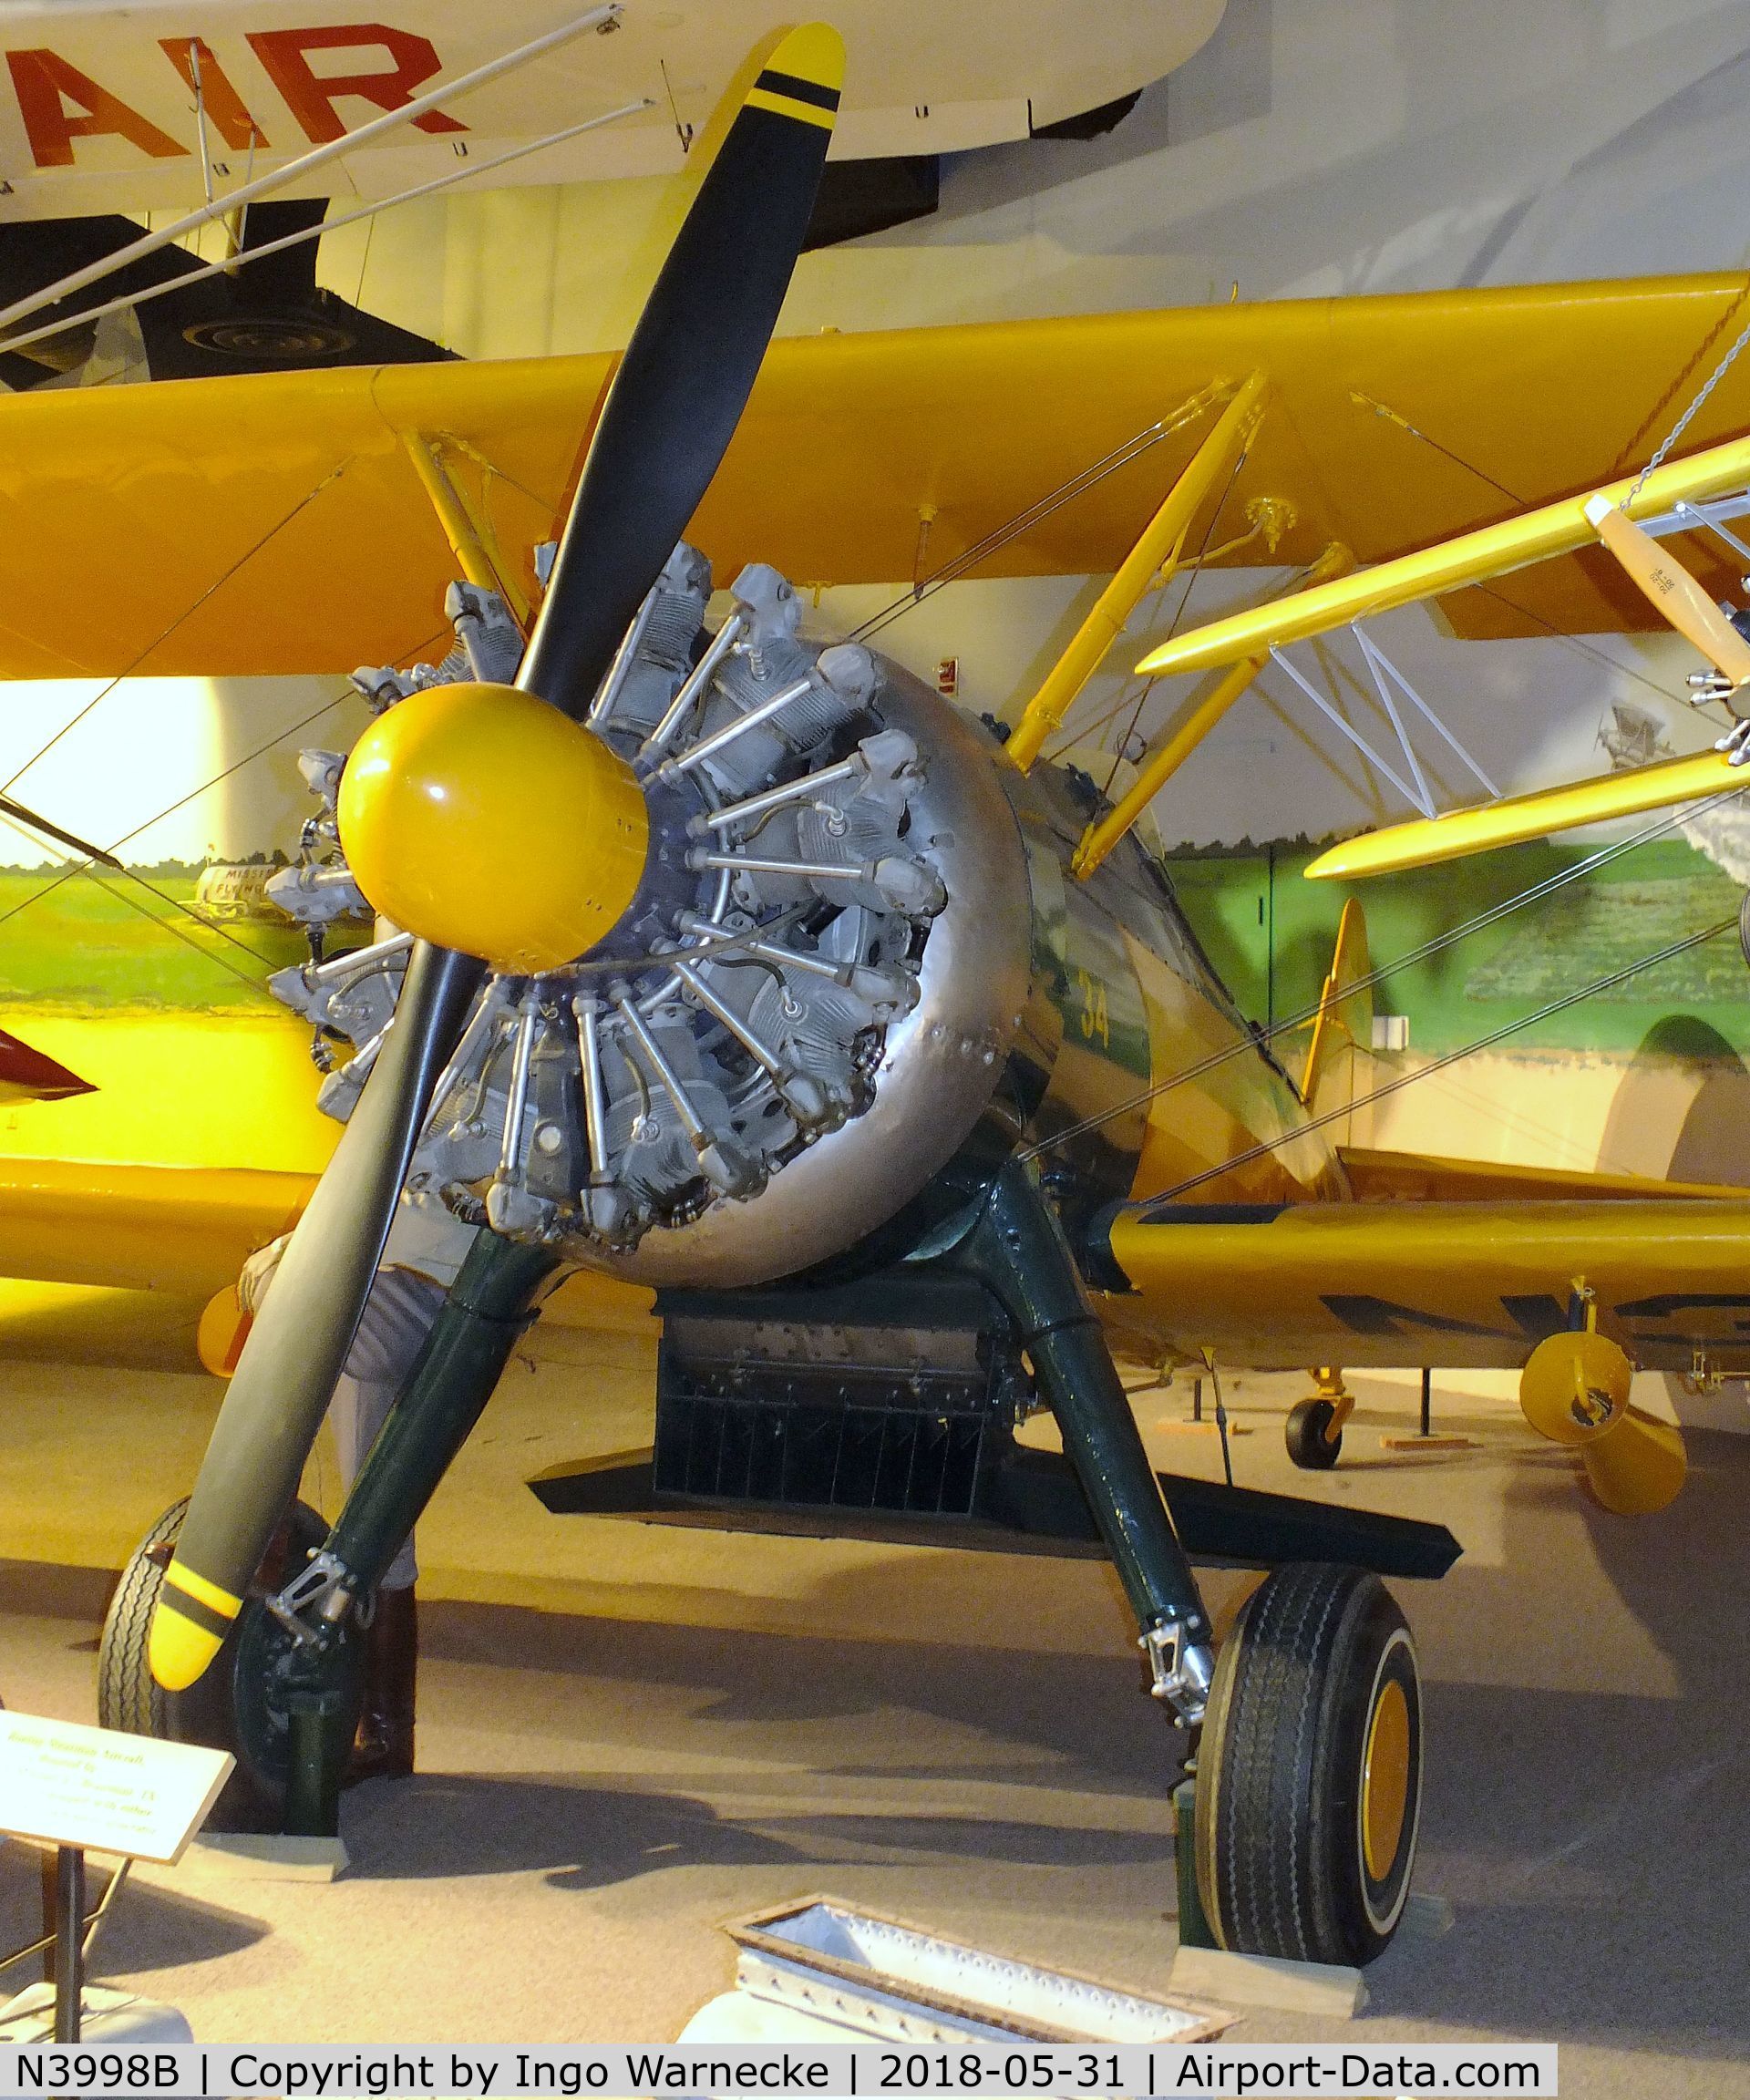 N3998B, 1942 Boeing E75 C/N 75-5292, Boeing (Stearman) E75, converted to single-seat ag-aircraft at the Mississippi Agriculture & Forestry Museum, Jackson MS